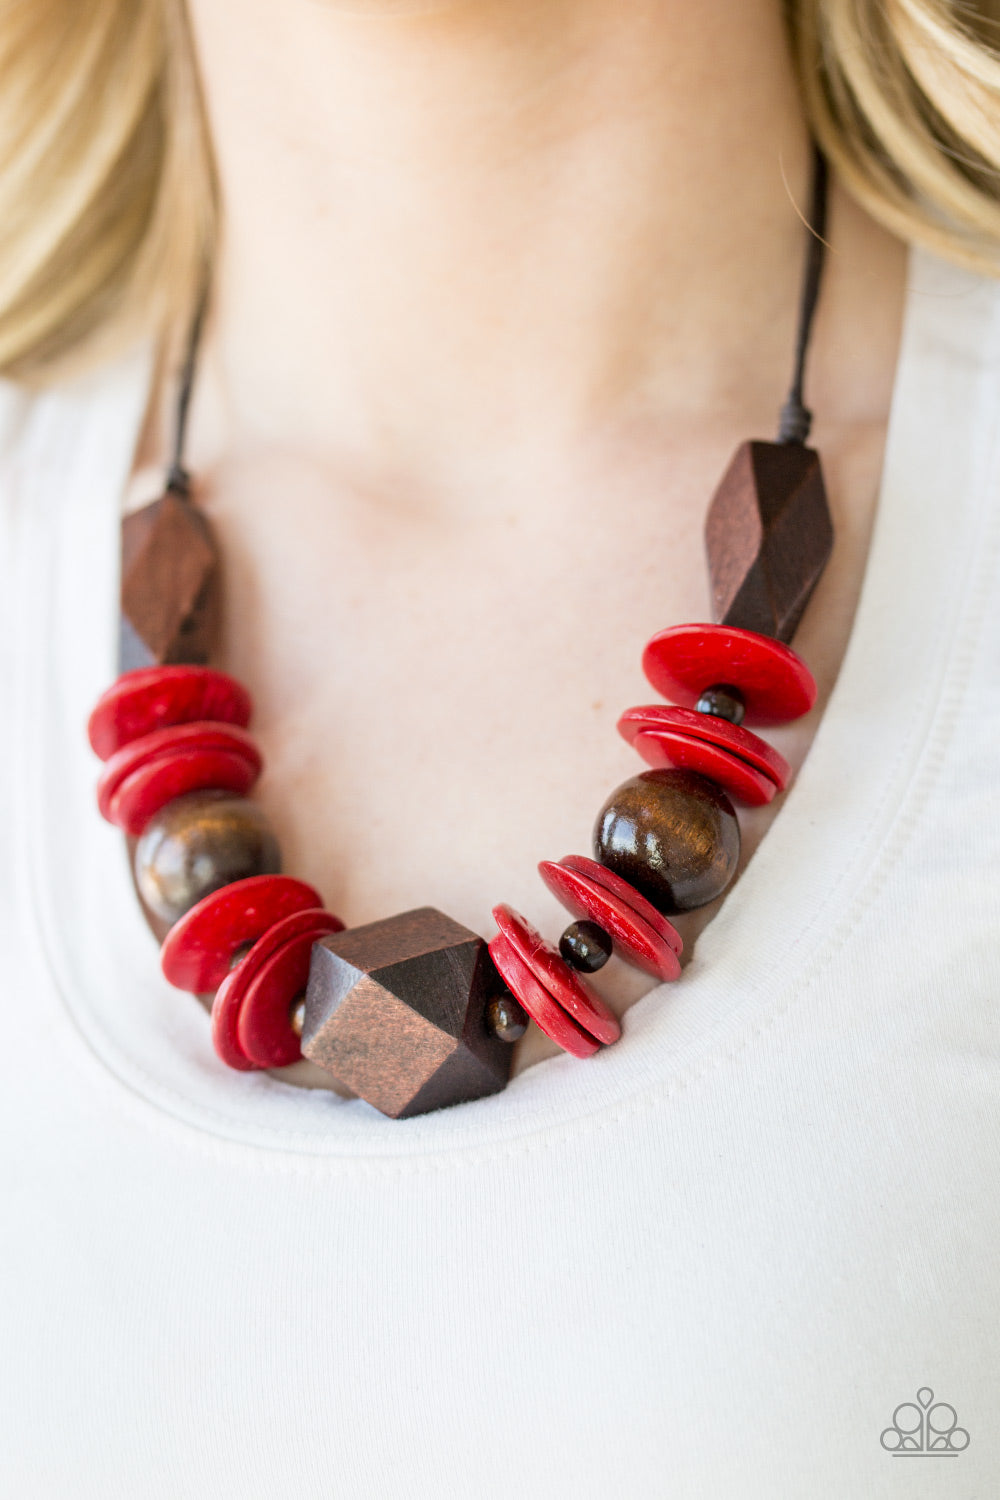 Paparazzi Accessories Pacific Paradise - Red Wood Necklaces featuring abstract geometric finishes, mismatched brown wooden beads and fiery red accents are threaded along shiny brown cording. A dramatic geometric bead adorns the center, creating a bold summery look below the collar. Features a button loop closure.  Sold as one individual necklace. Includes one pair of matching earrings.